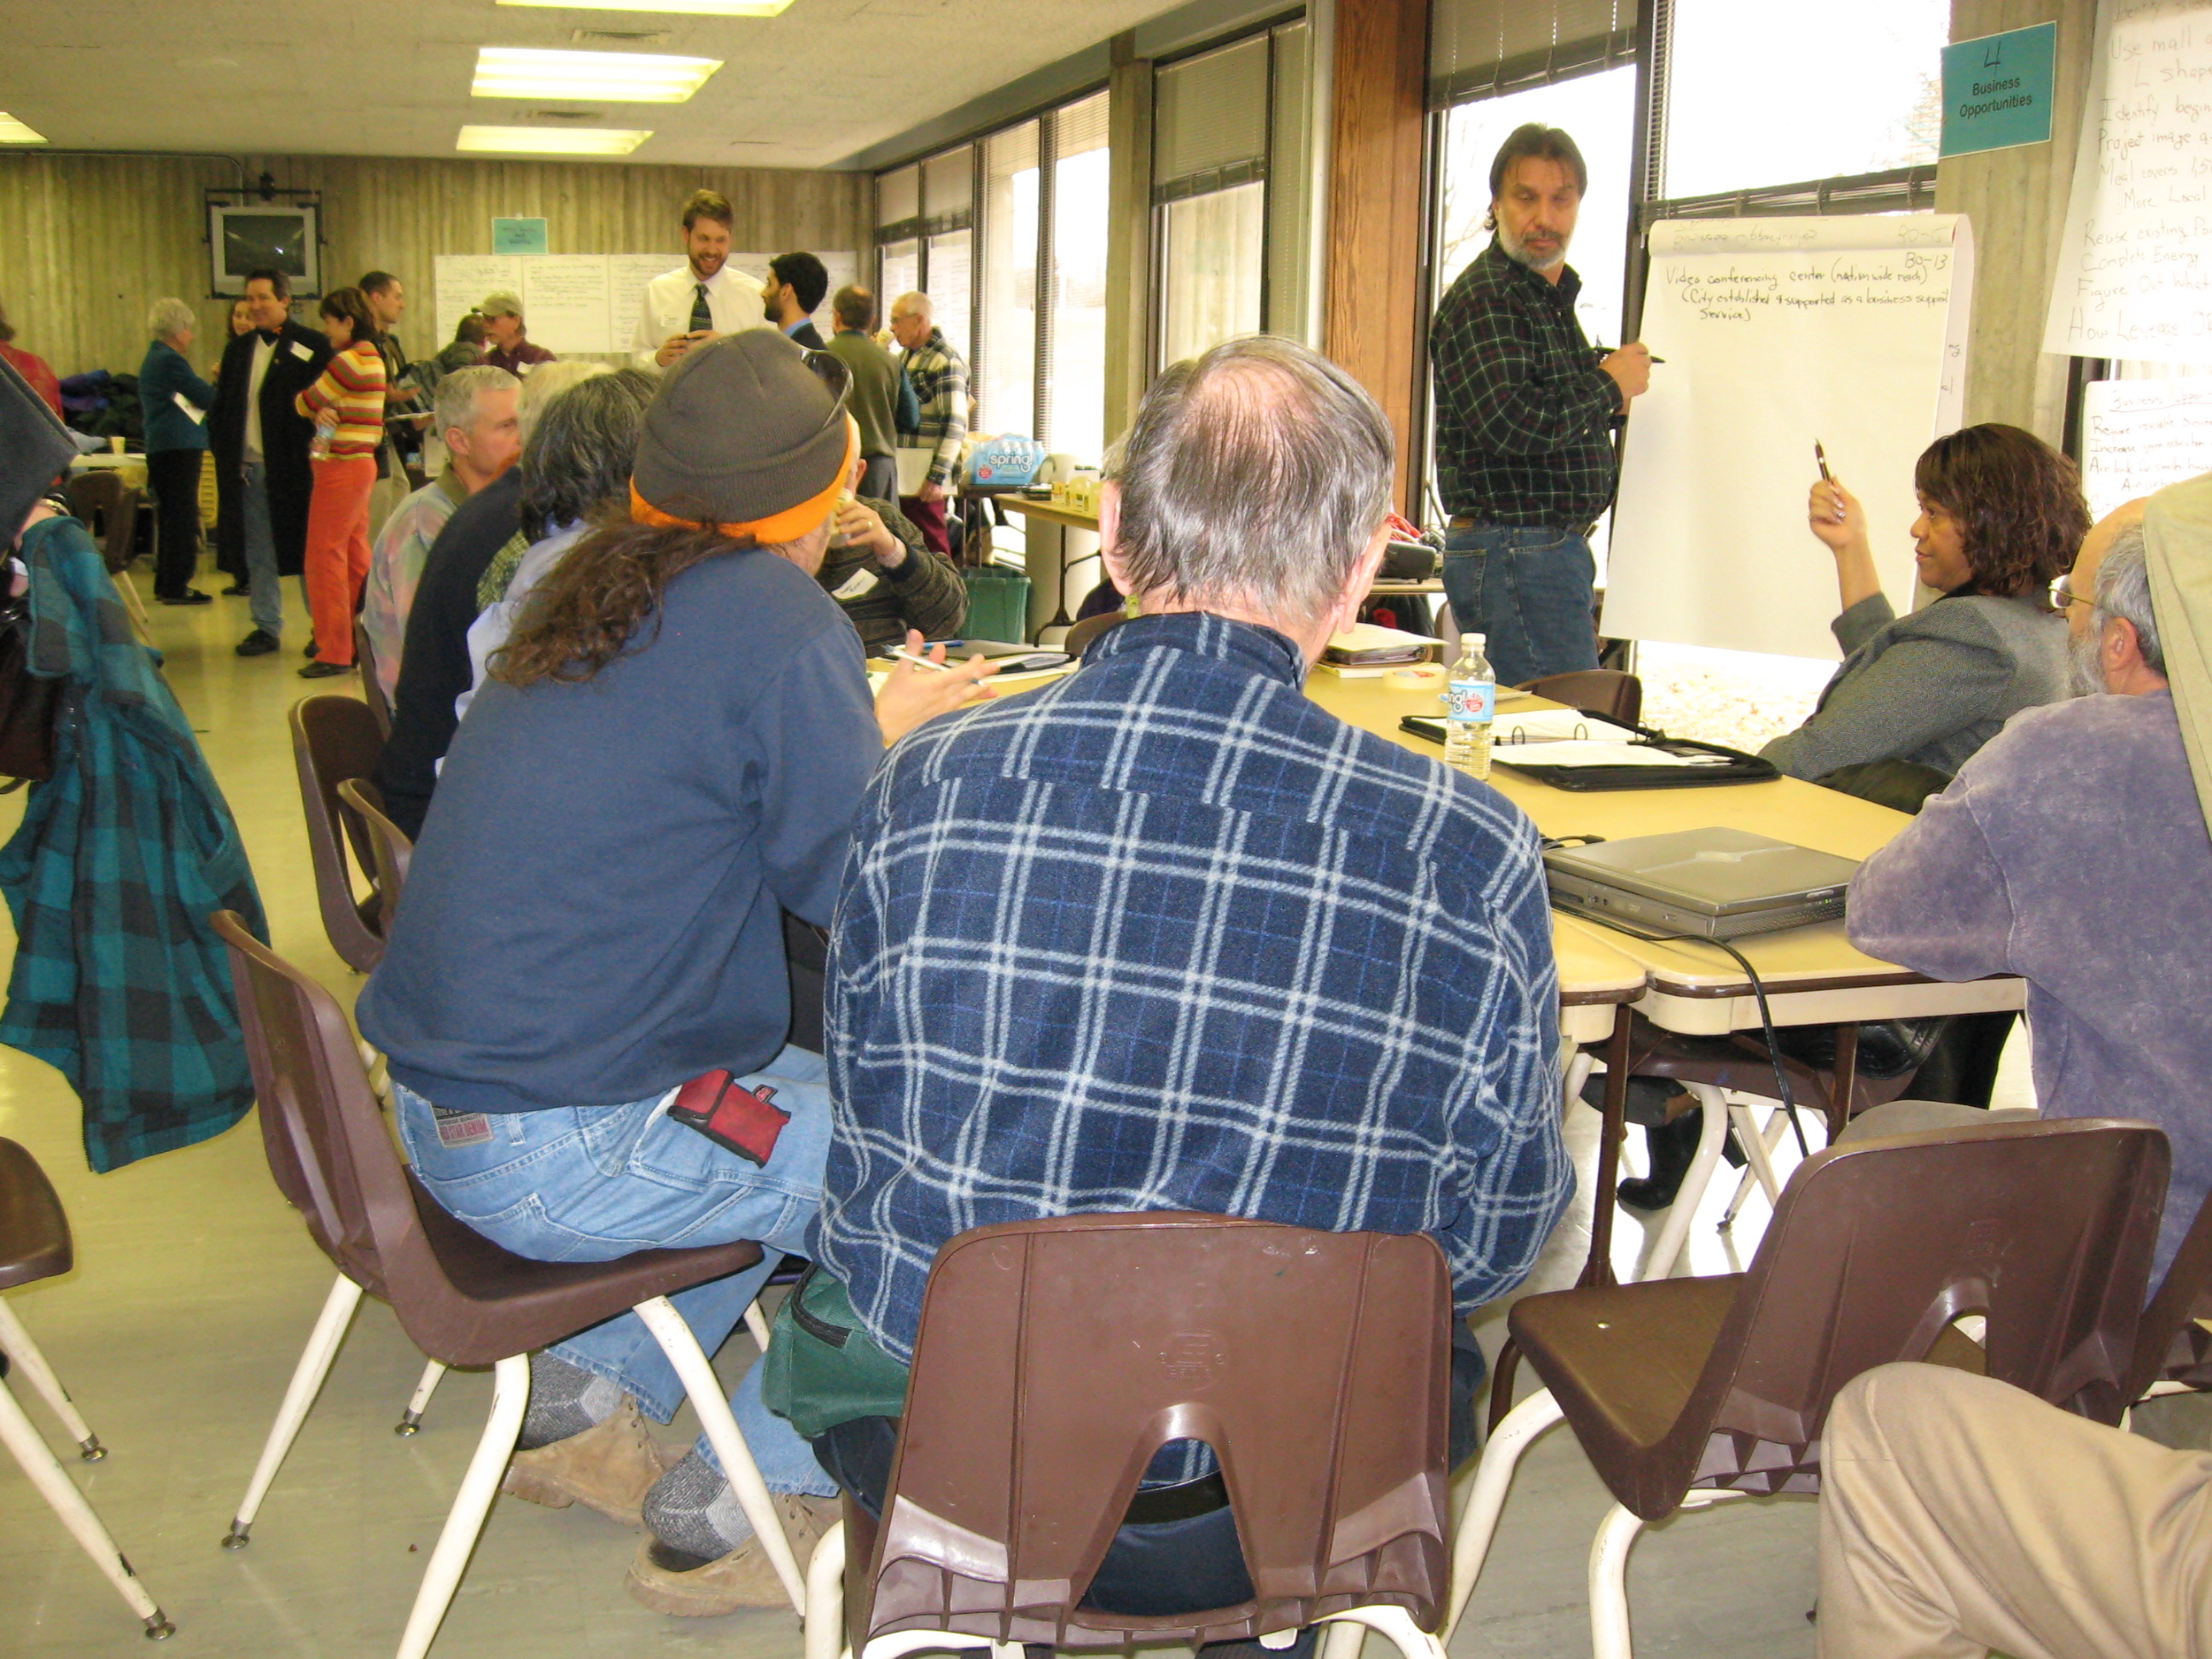 Group discussion at sustainability forum, led by Ruby Miller and recorded by Chuck Agle